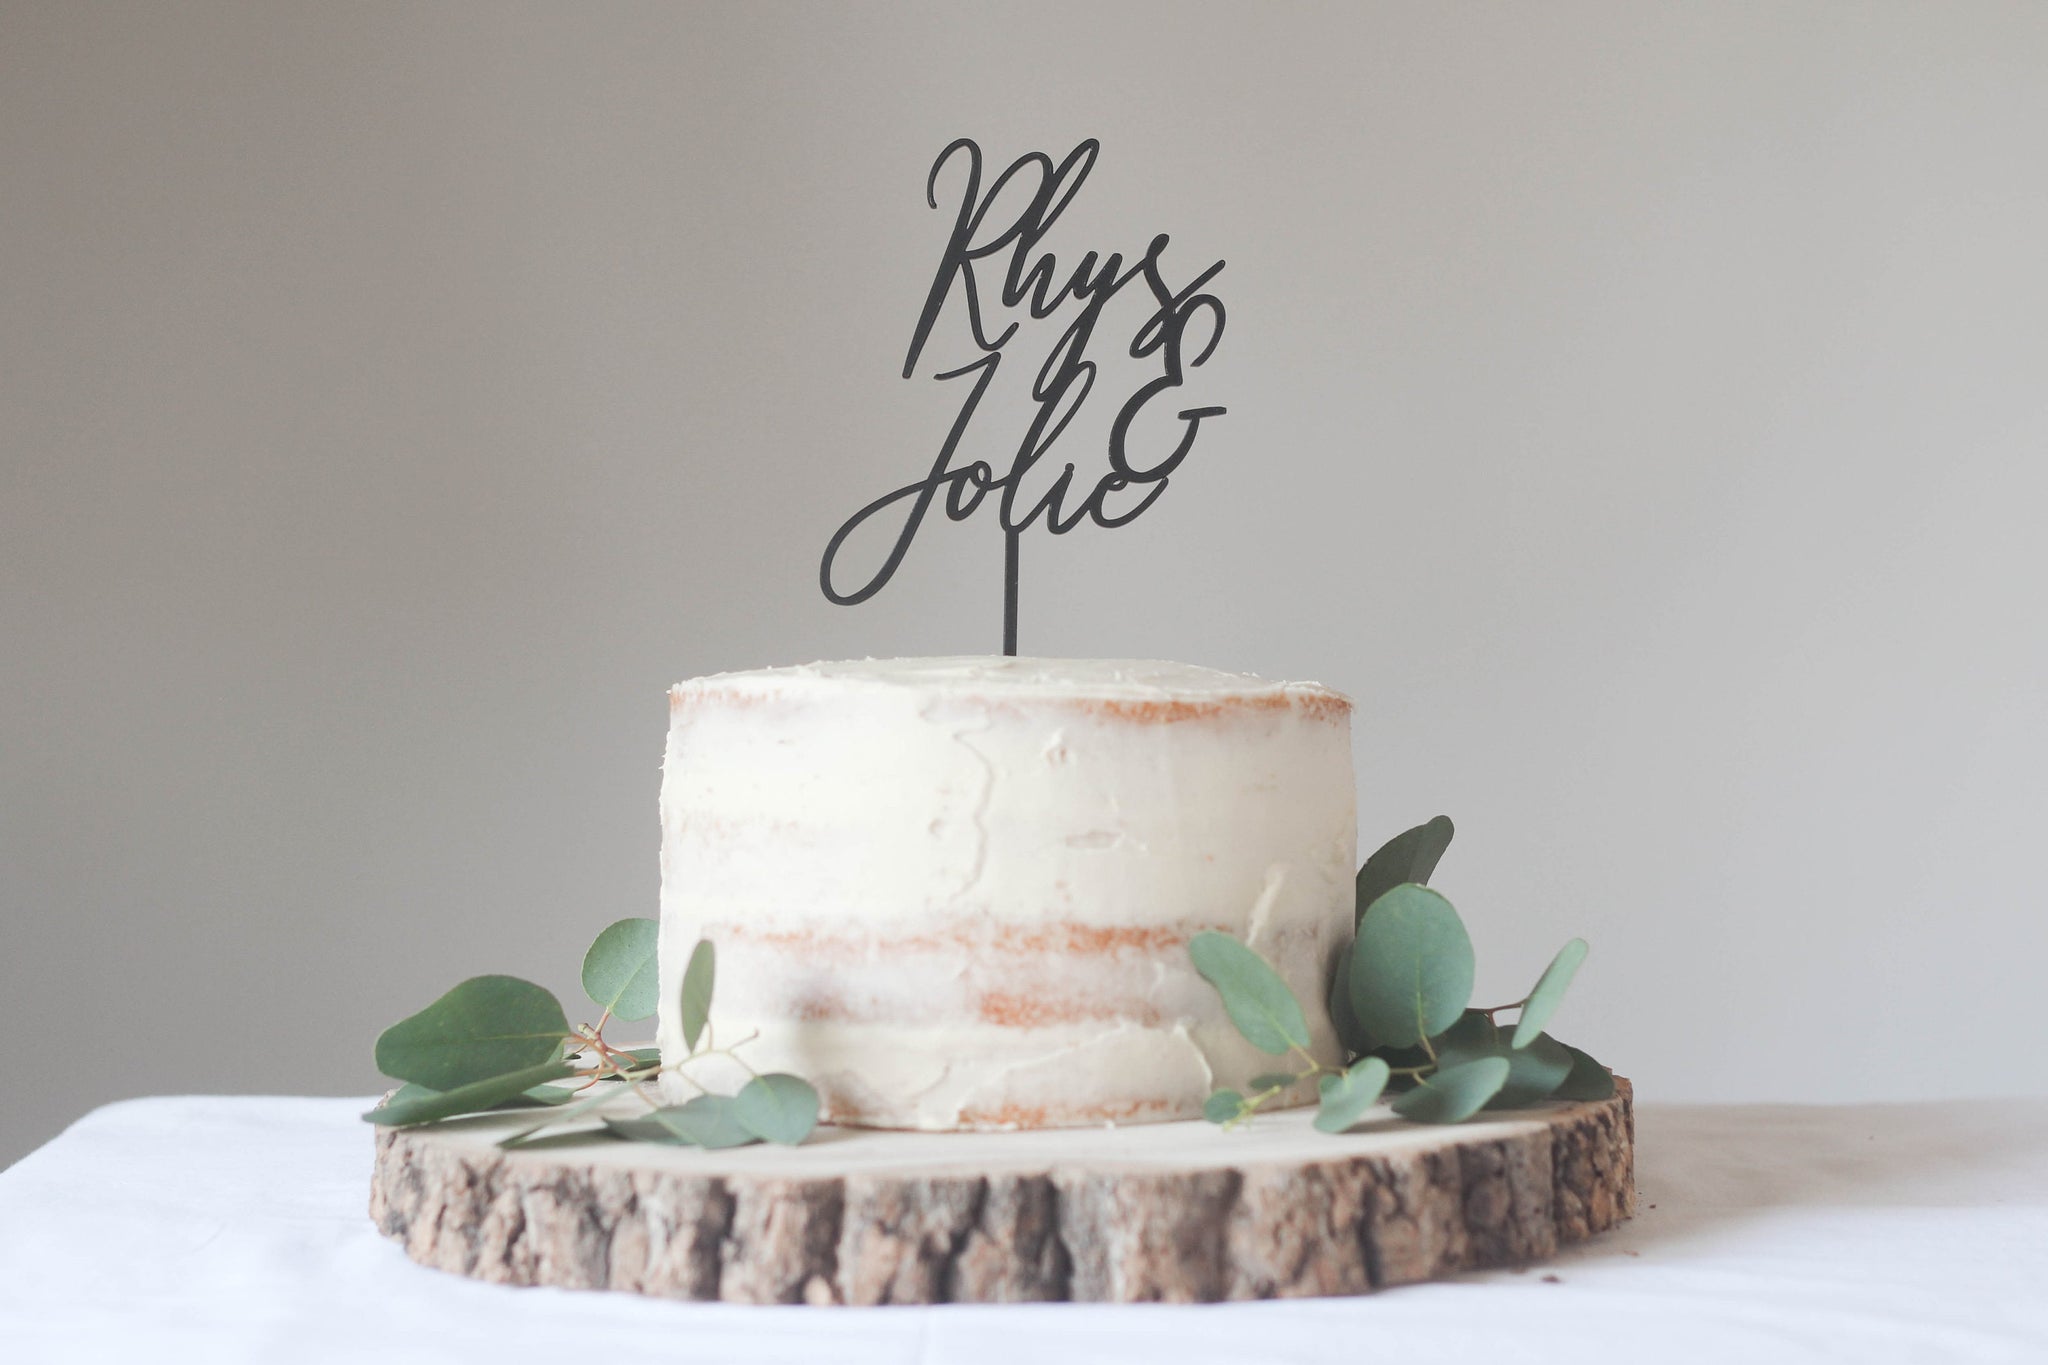 Contemporary Wedding Cake Topper With The Bride And Groom's First Name